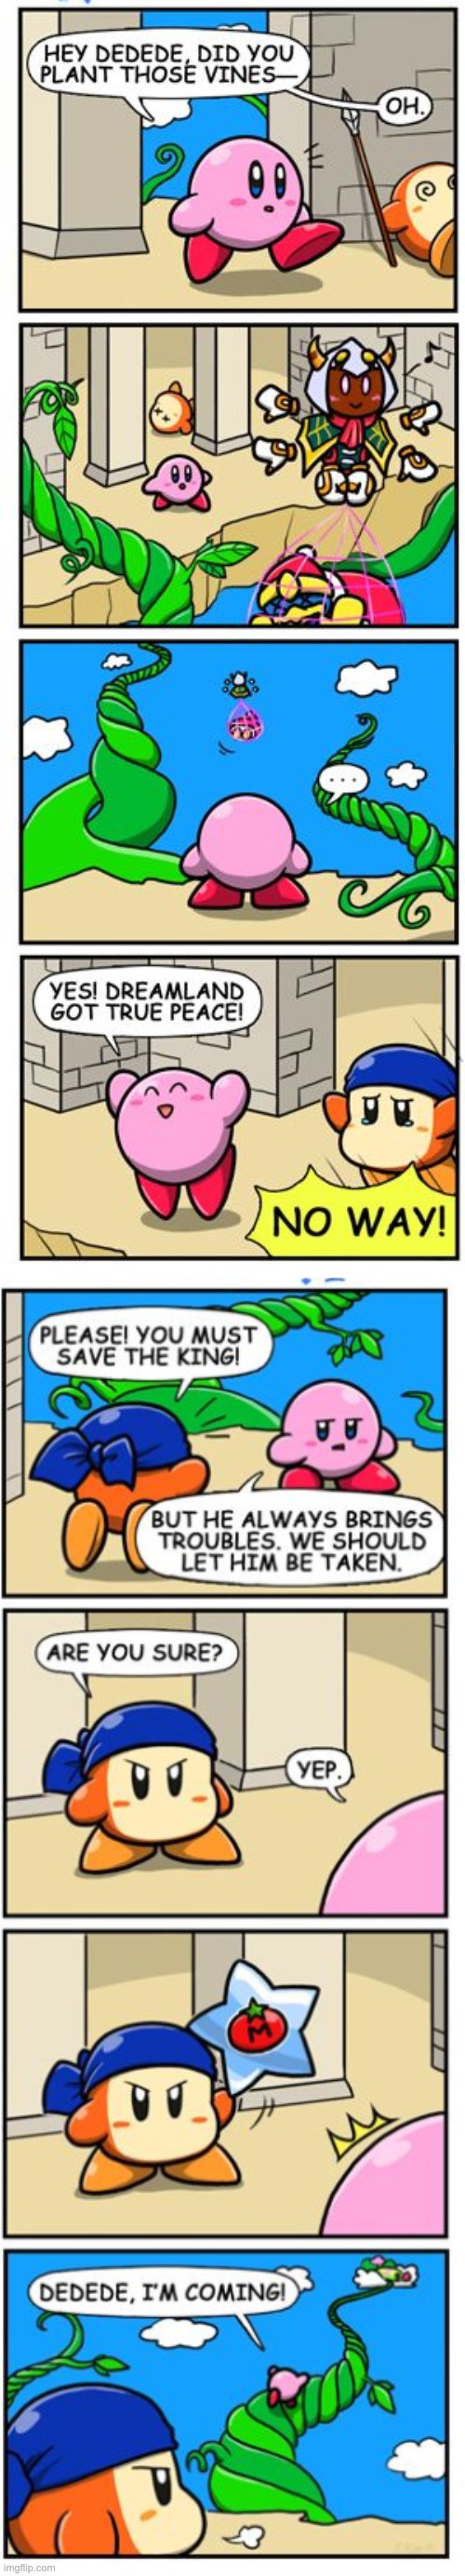 Kirby's REAL motivation in Triple Deluxe: | made w/ Imgflip meme maker